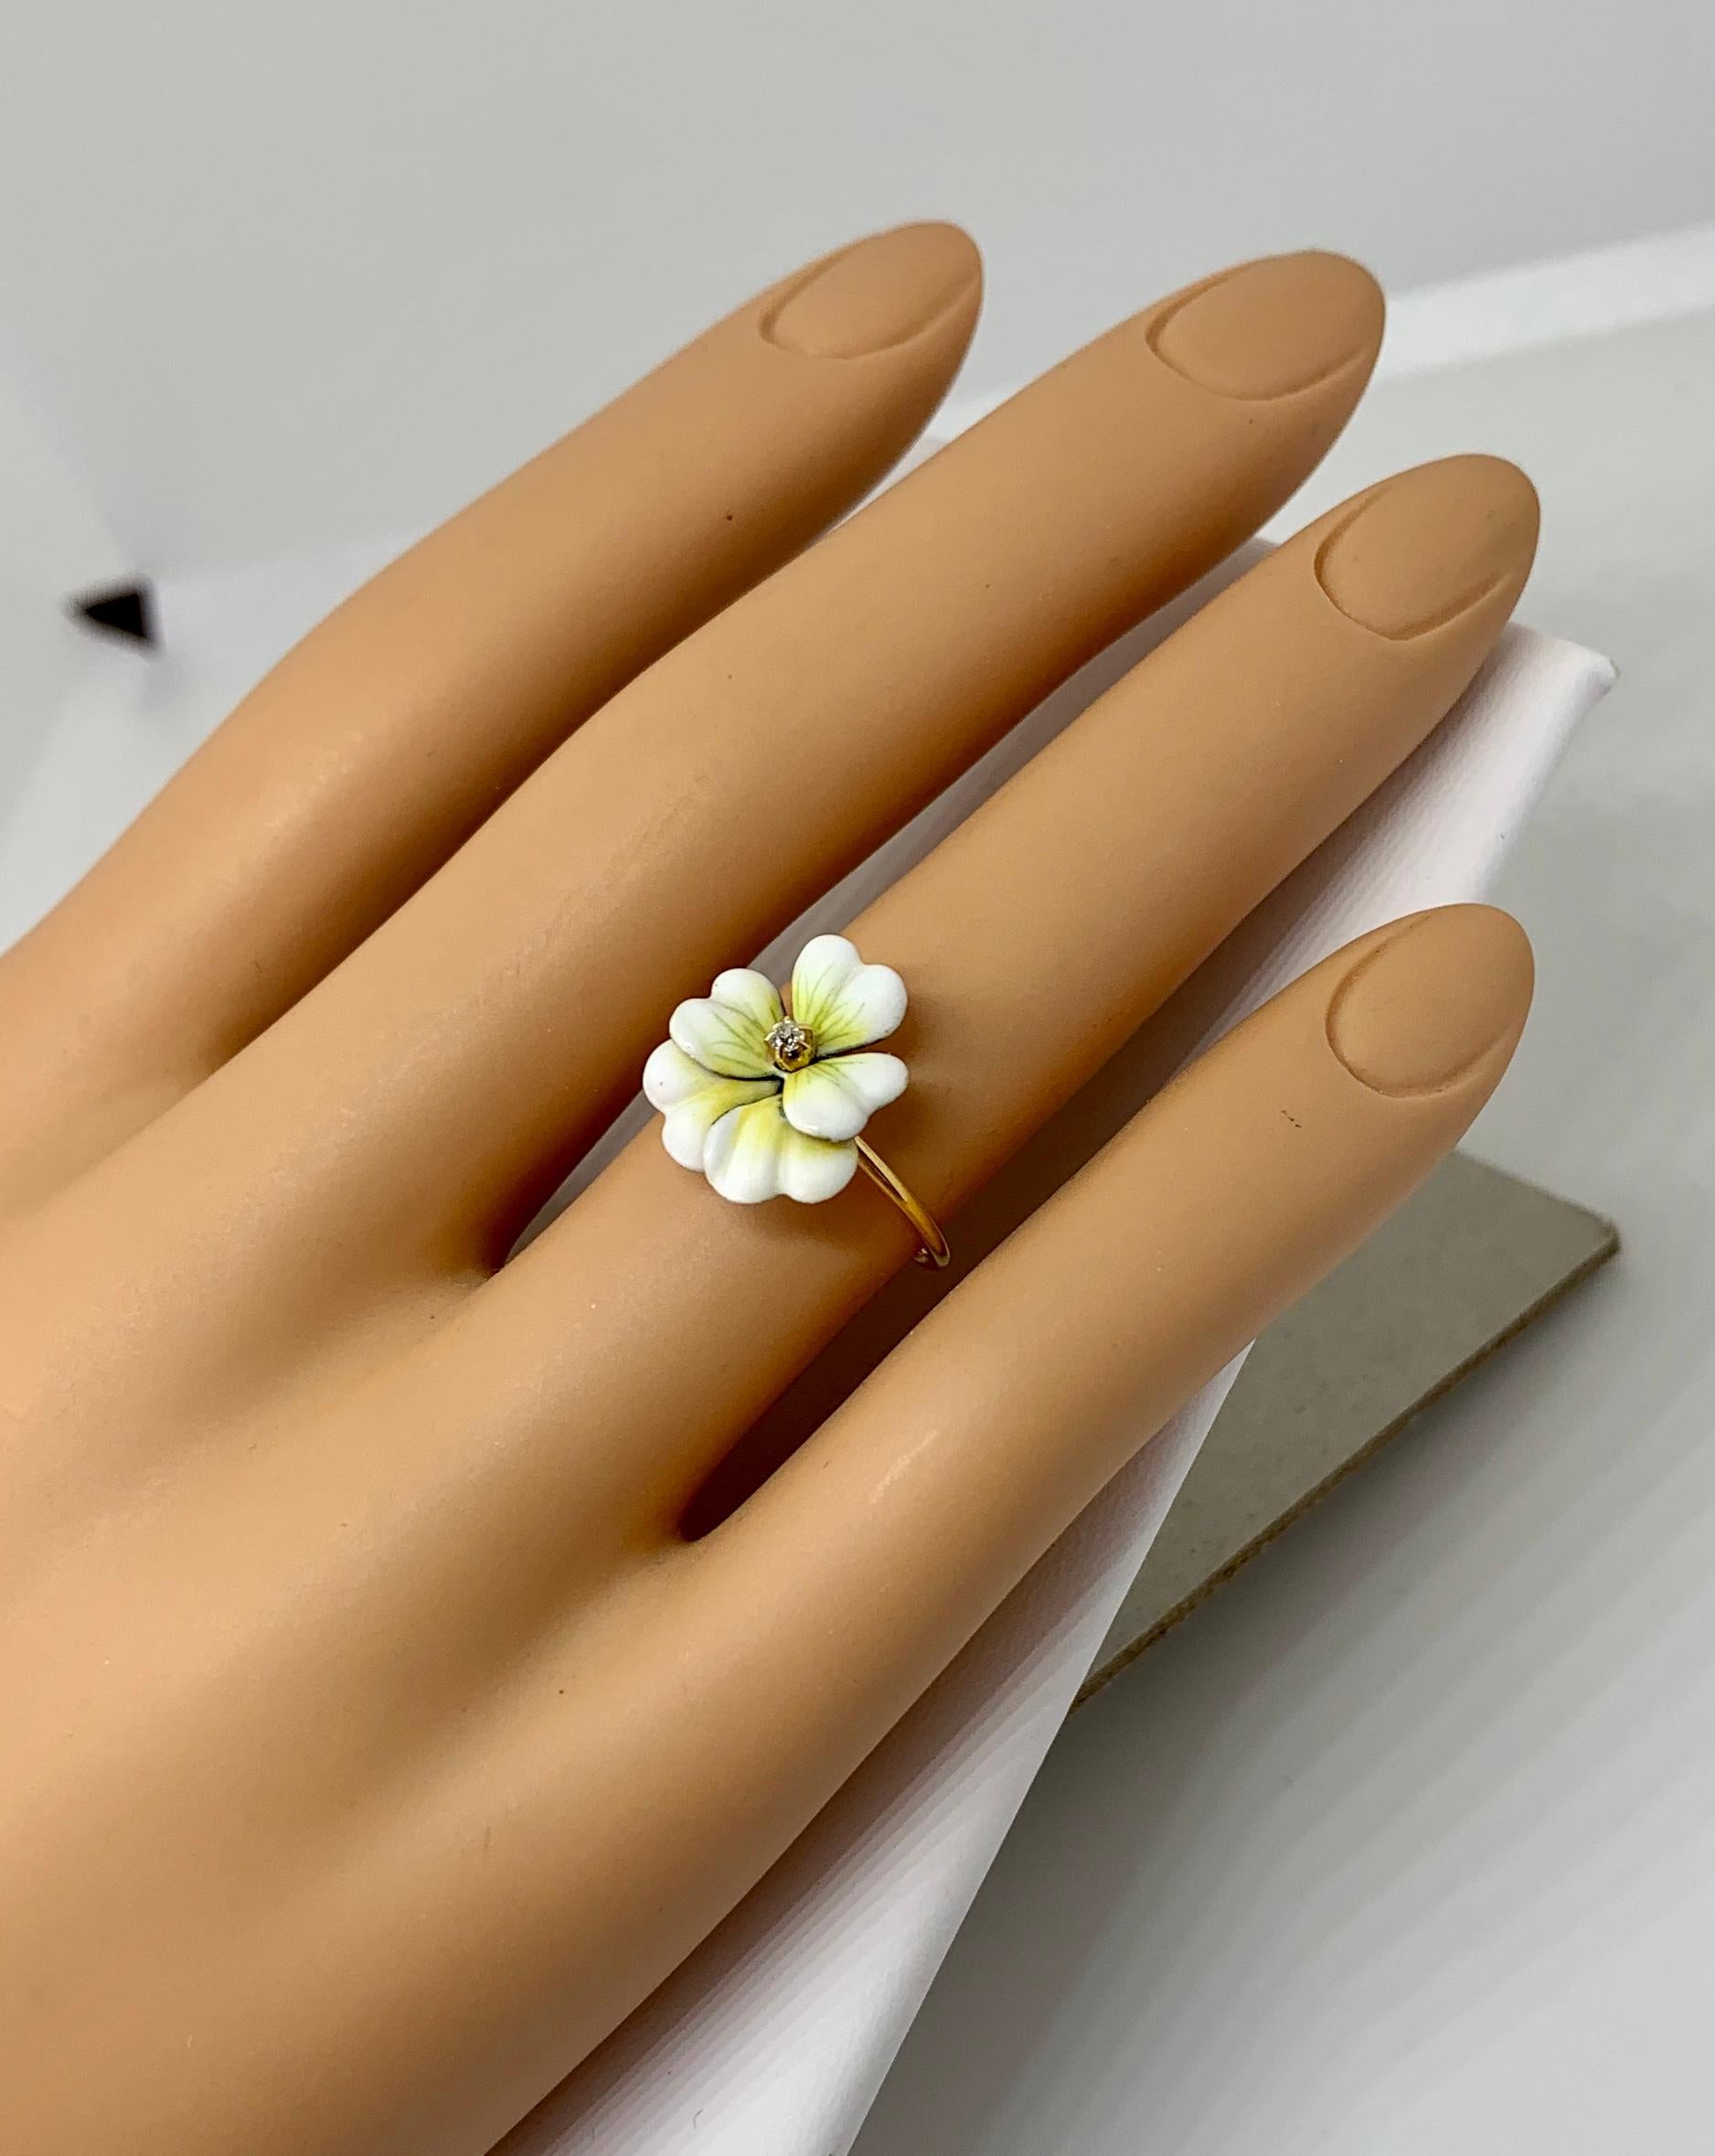 This is a very special antique Victorian - Edwardian Ring in the form of a double Pansy Flower in gorgeous white and pale green enamel with a central antique Old Mine Cut Diamond.  The beautiful double pansy flower is rare and is done with exquisite